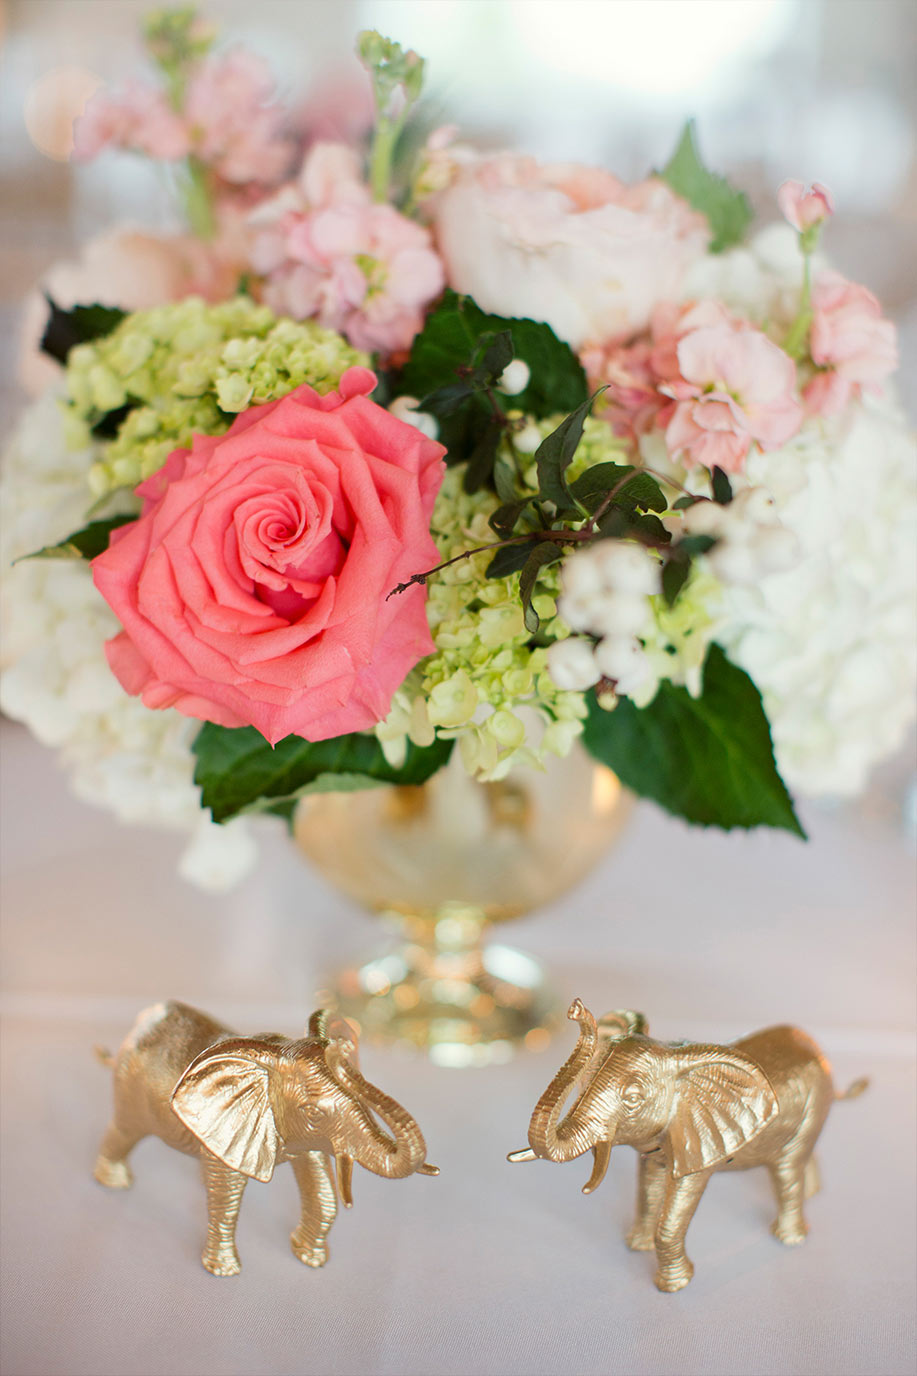 Gold elephant animal statues with low wedding table centerpiece